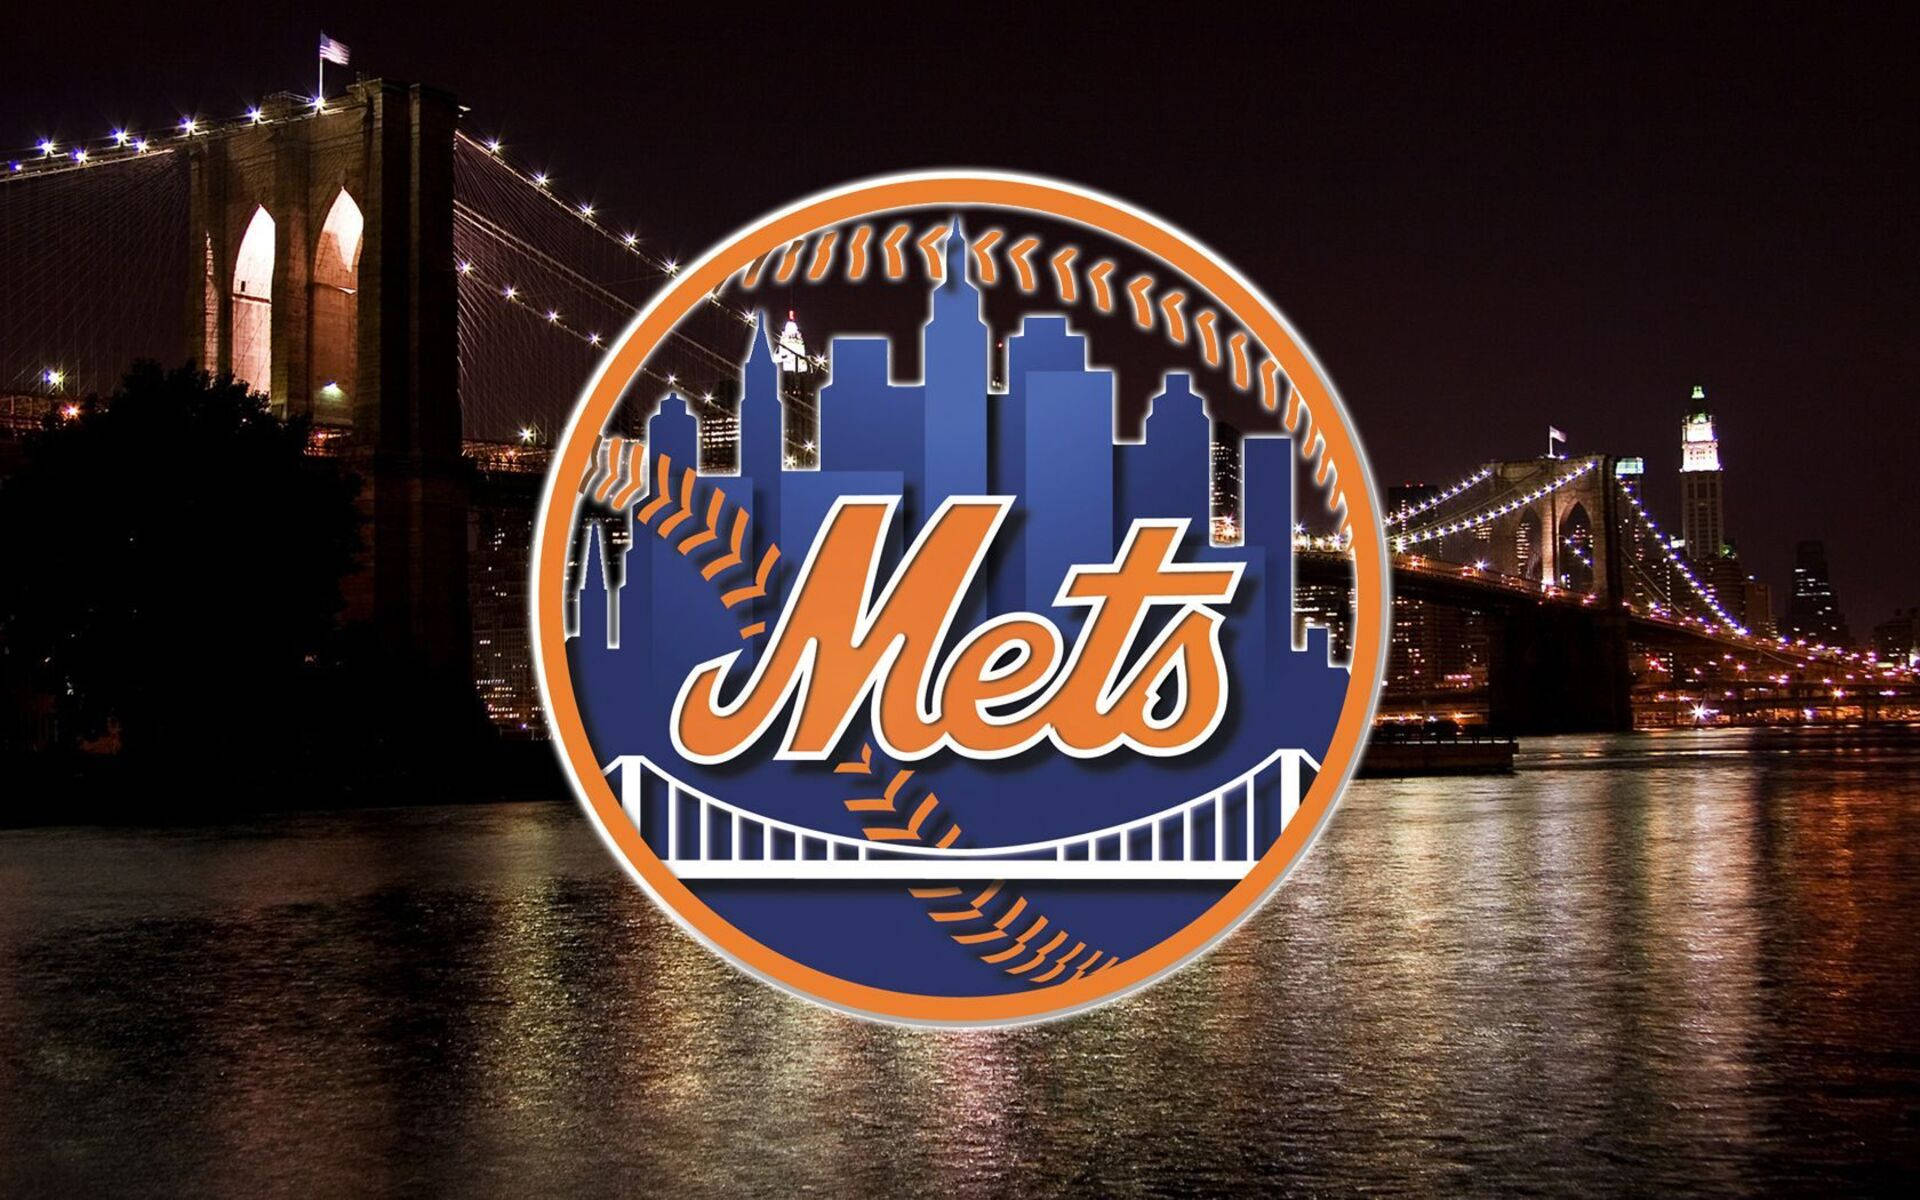 Caption: Iconic Image Of New York Mets Player In Action Wallpaper